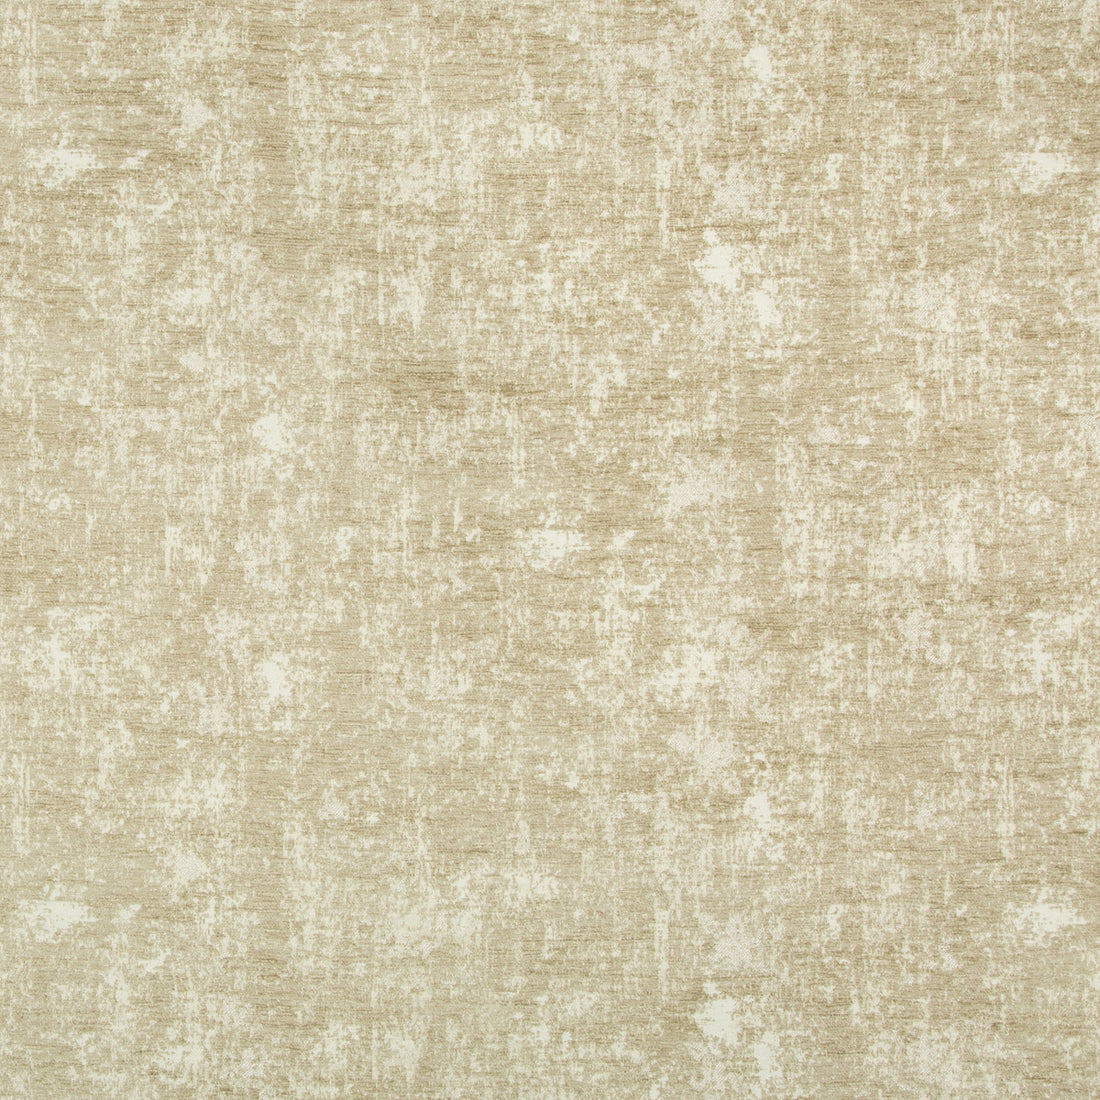 Les Ecorces Woven fabric in sand color - pattern 8017130.16.0 - by Brunschwig &amp; Fils in the Les Ensembliers collection